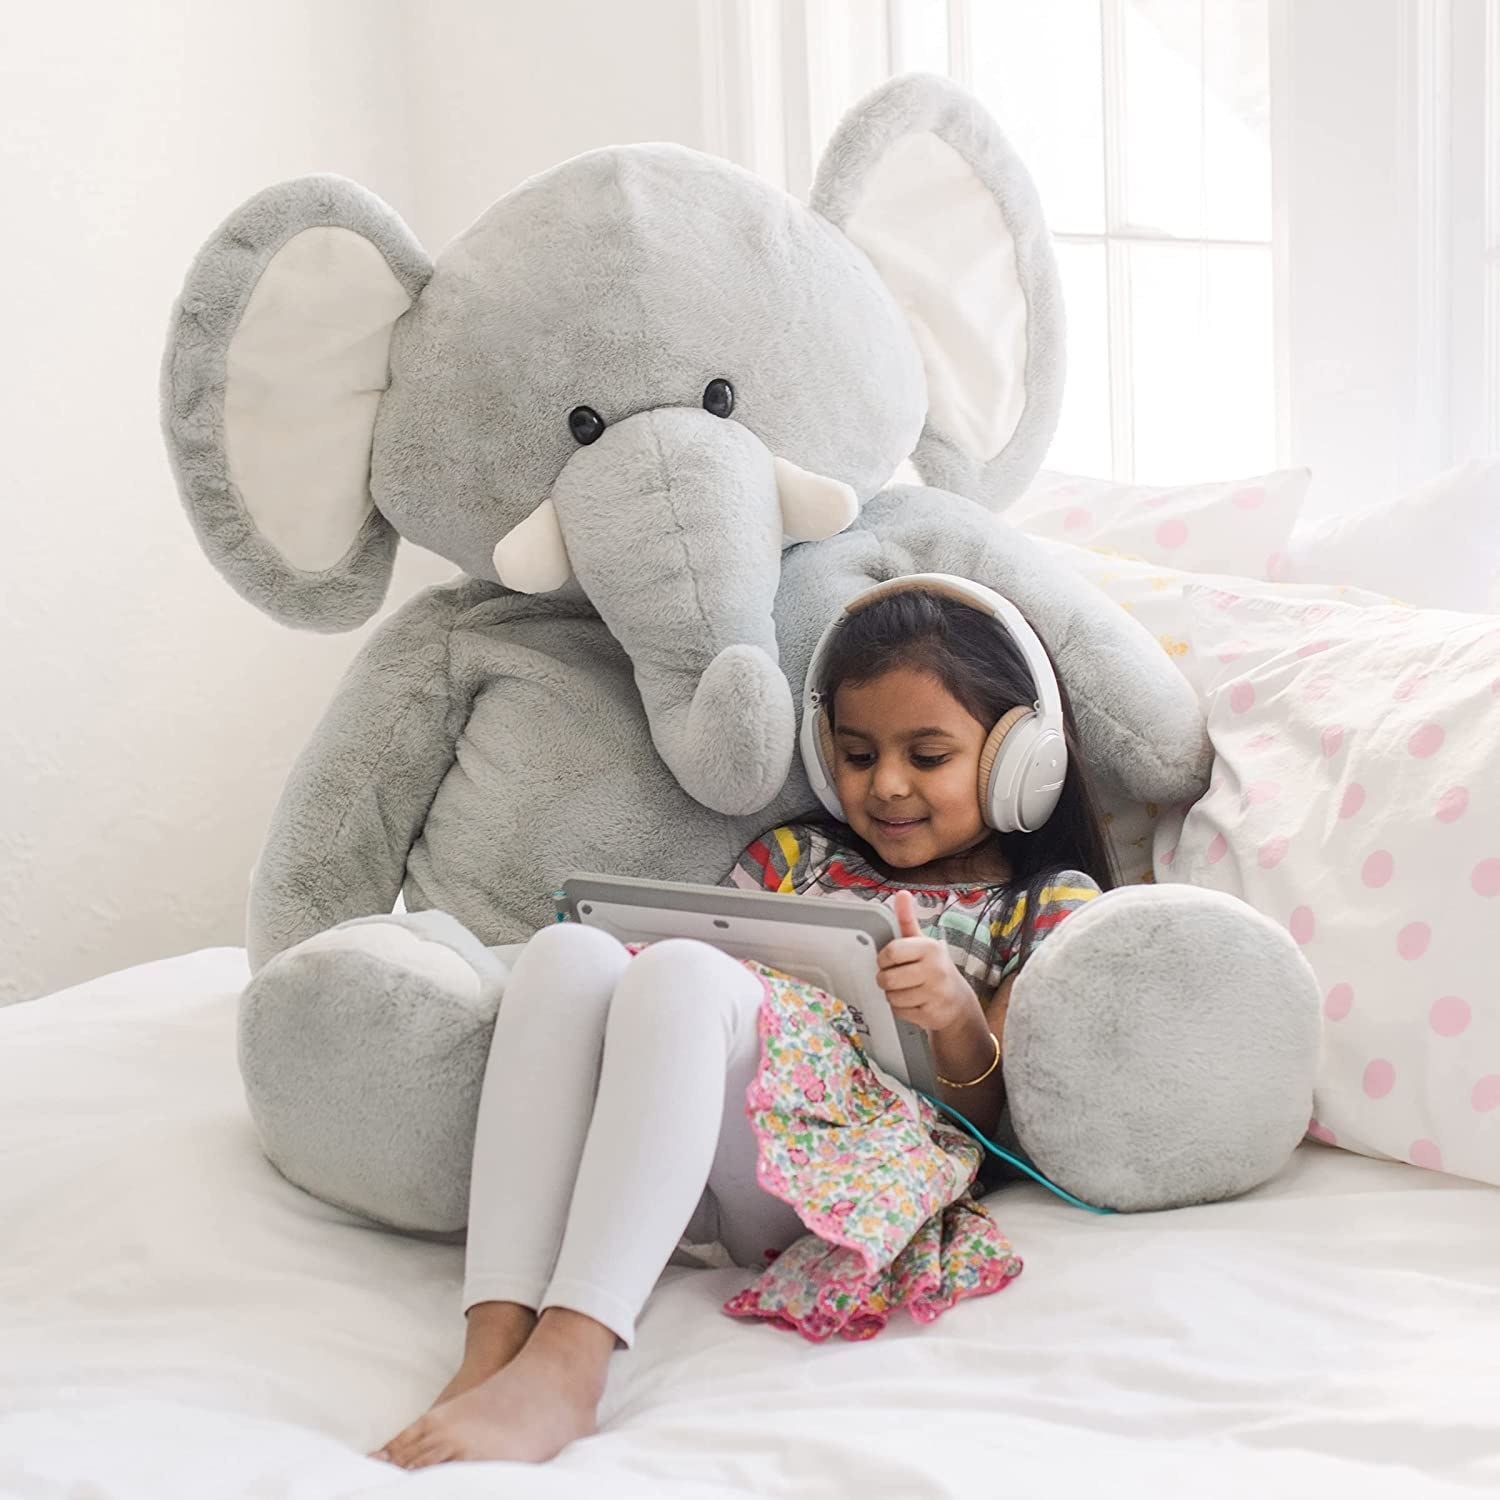 Child model being cuddled by large gray stuffed elephant toy